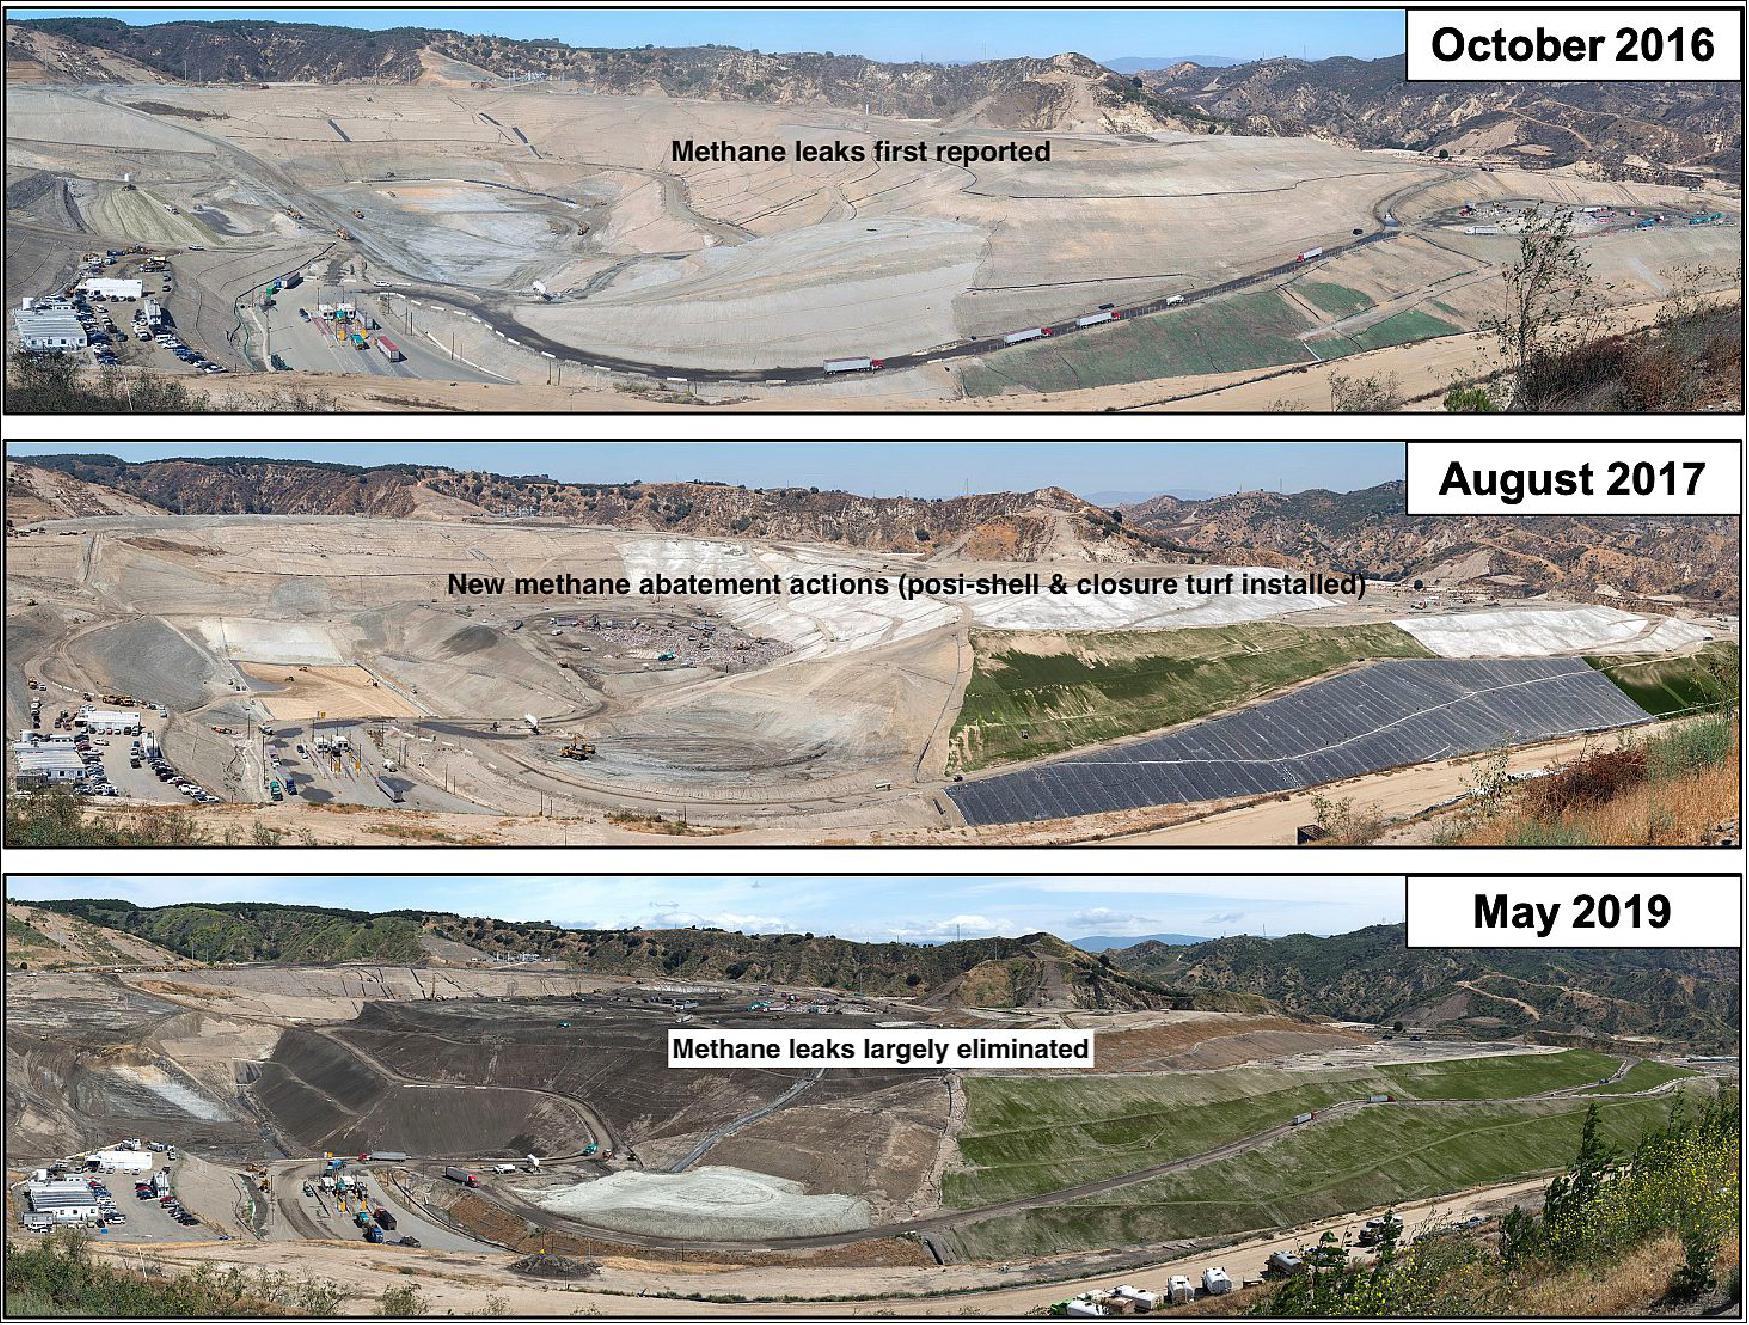 Figure 4: In this example, one of the landfill operators in southern California confirmed the methane emissions and determined they were due to problems with surface cover and gas capture systems. Over the next year the operator instituted a number of changes that dramatically reduced the methane emissions. Subsequent flyovers confirmed a corresponding reduction in the number of odor complaints for that facility (image credit: Carbon Mapper collaboration)